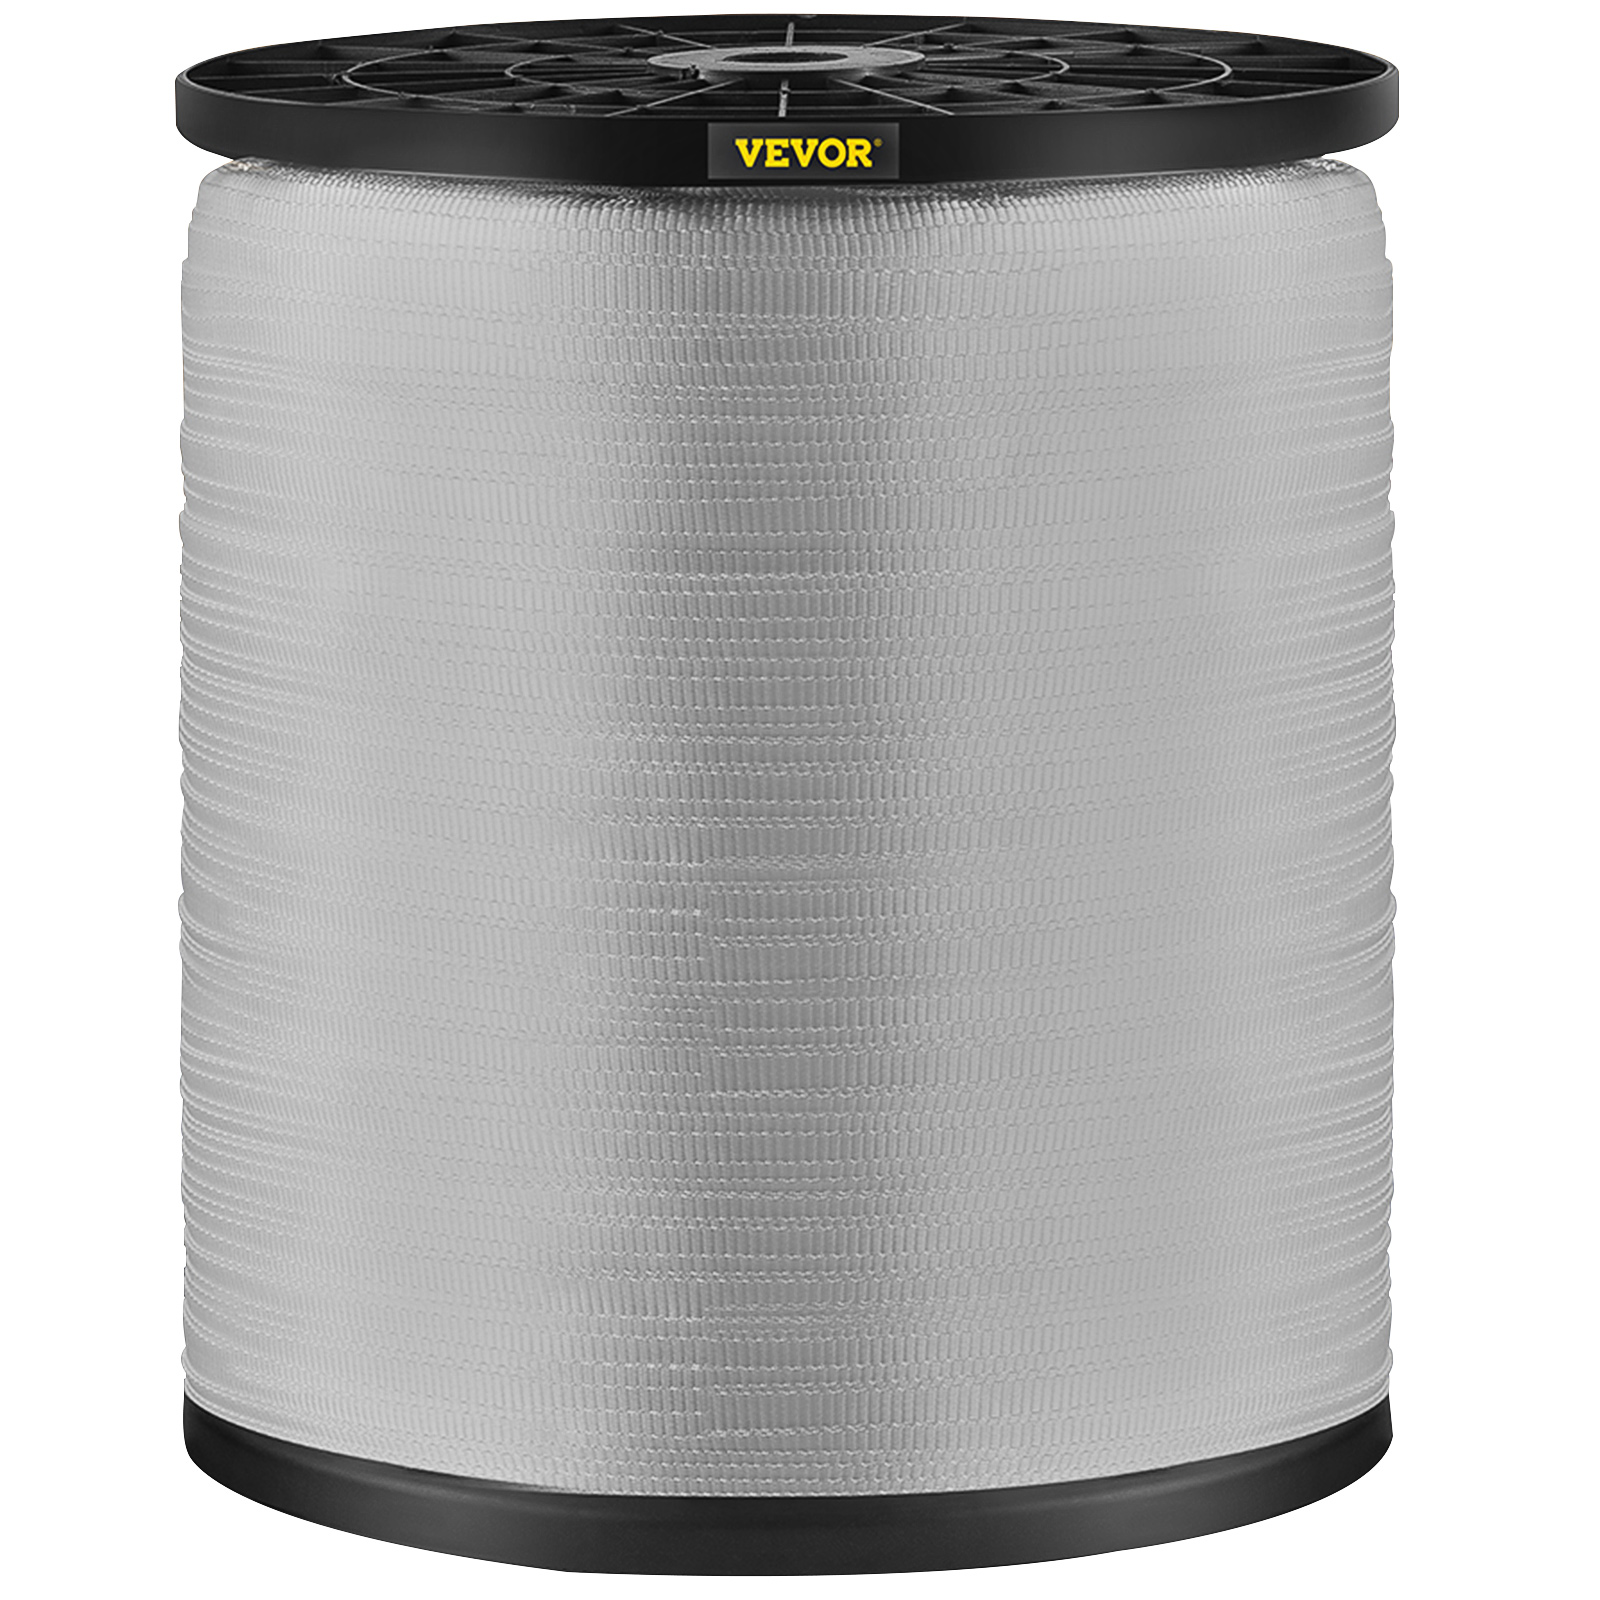 Vevor 5/8" X 1053' Polyester Pull Tape Flat Rope 1800 Lbs Tensile Capacity от Vevor Many GEOs